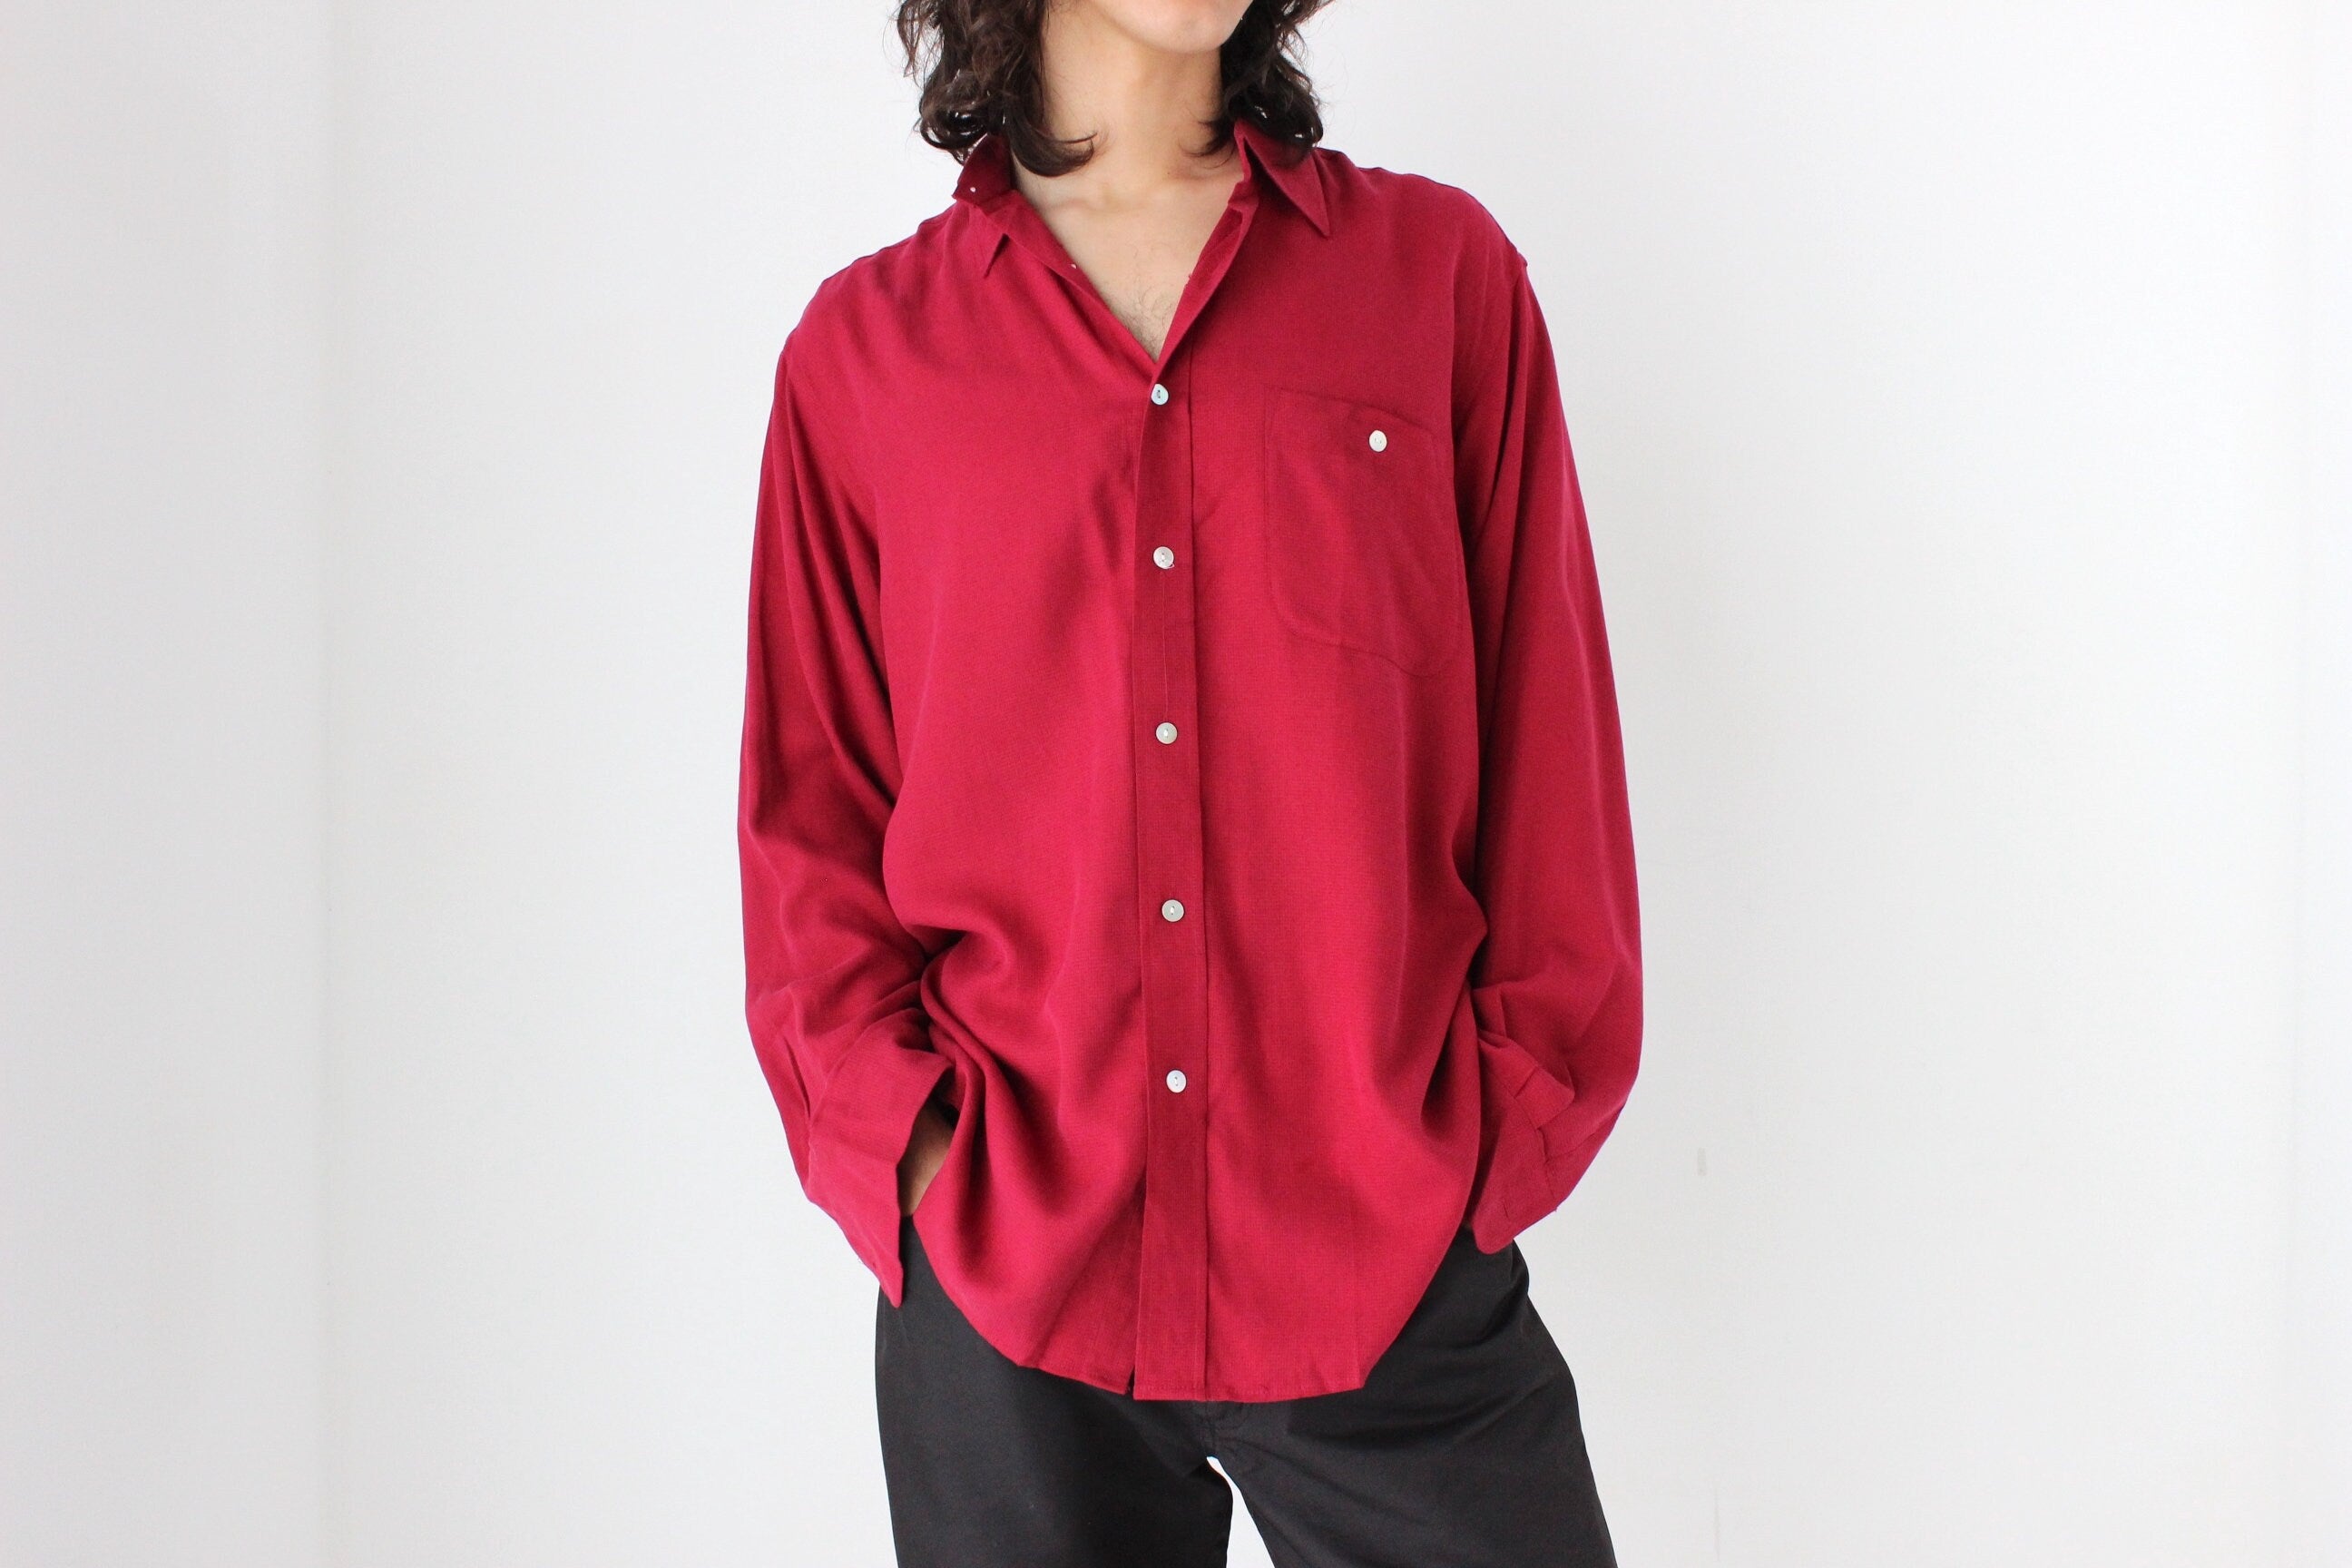 90s Textured Pure Silk Relaxed Shirt in Burgundy